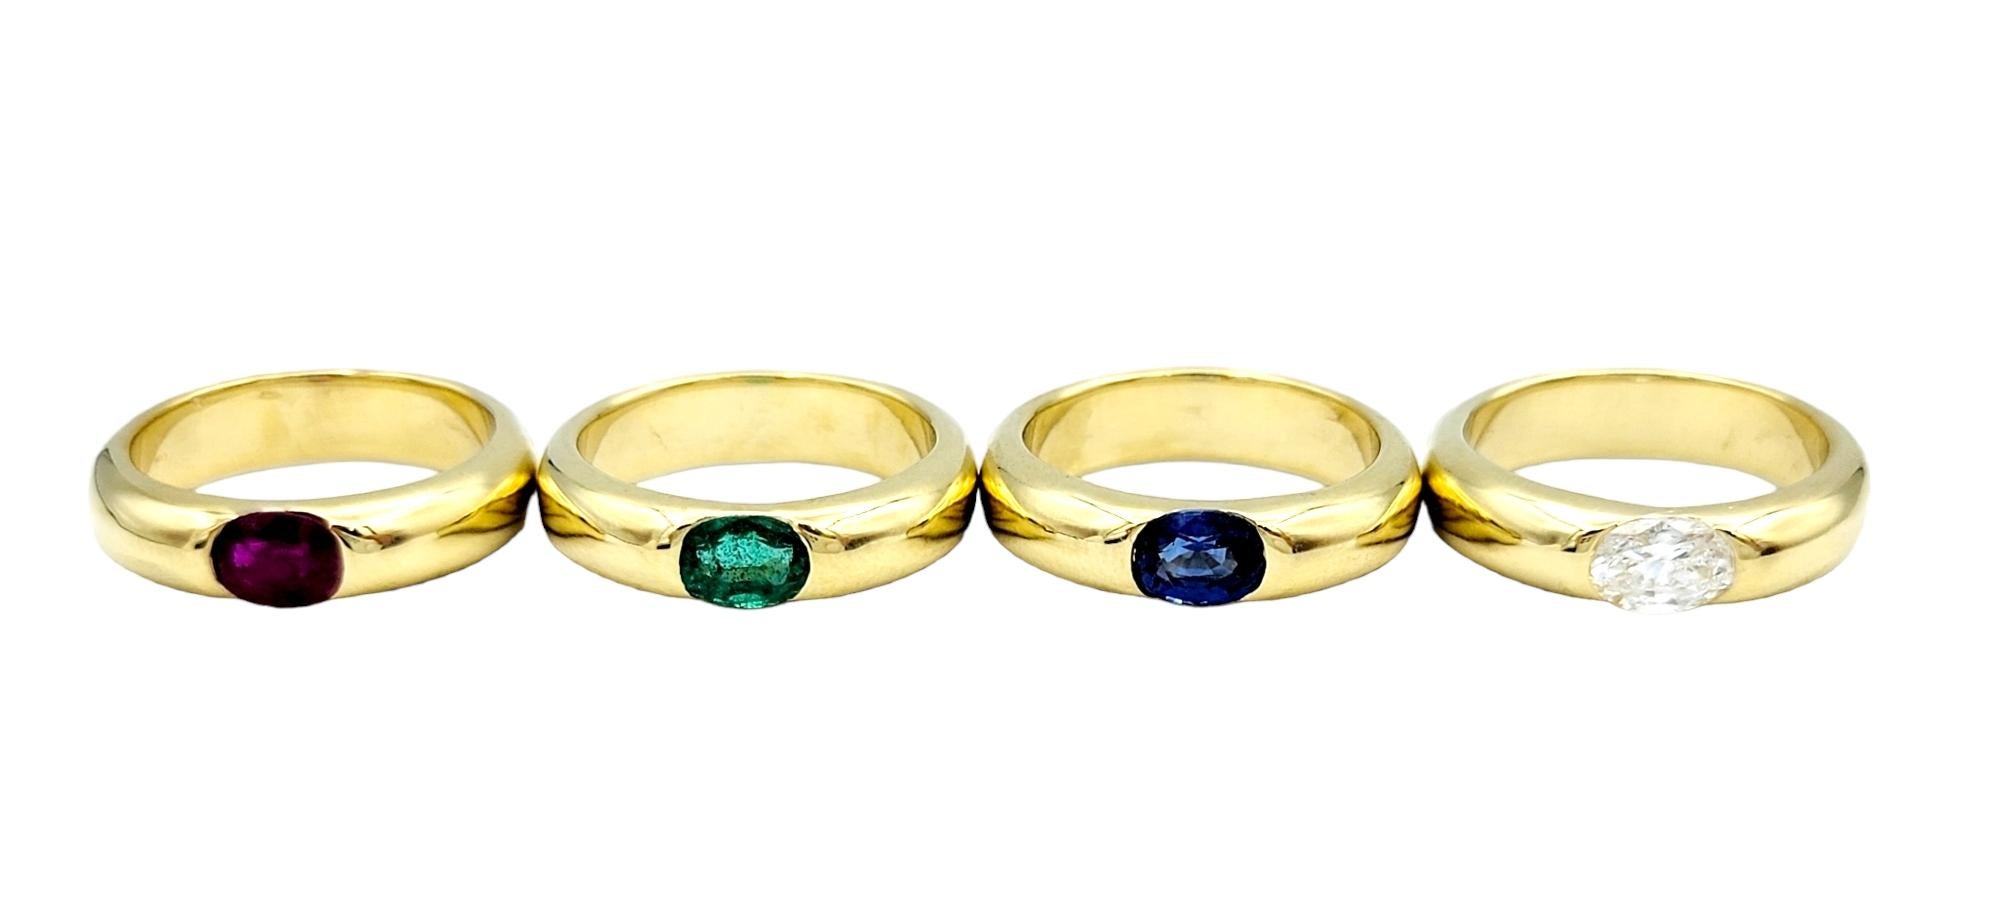 Contemporary Set of 4 Multi-Gemstone Stacking Band Rings in Polished 18 Karat Yellow Gold  For Sale